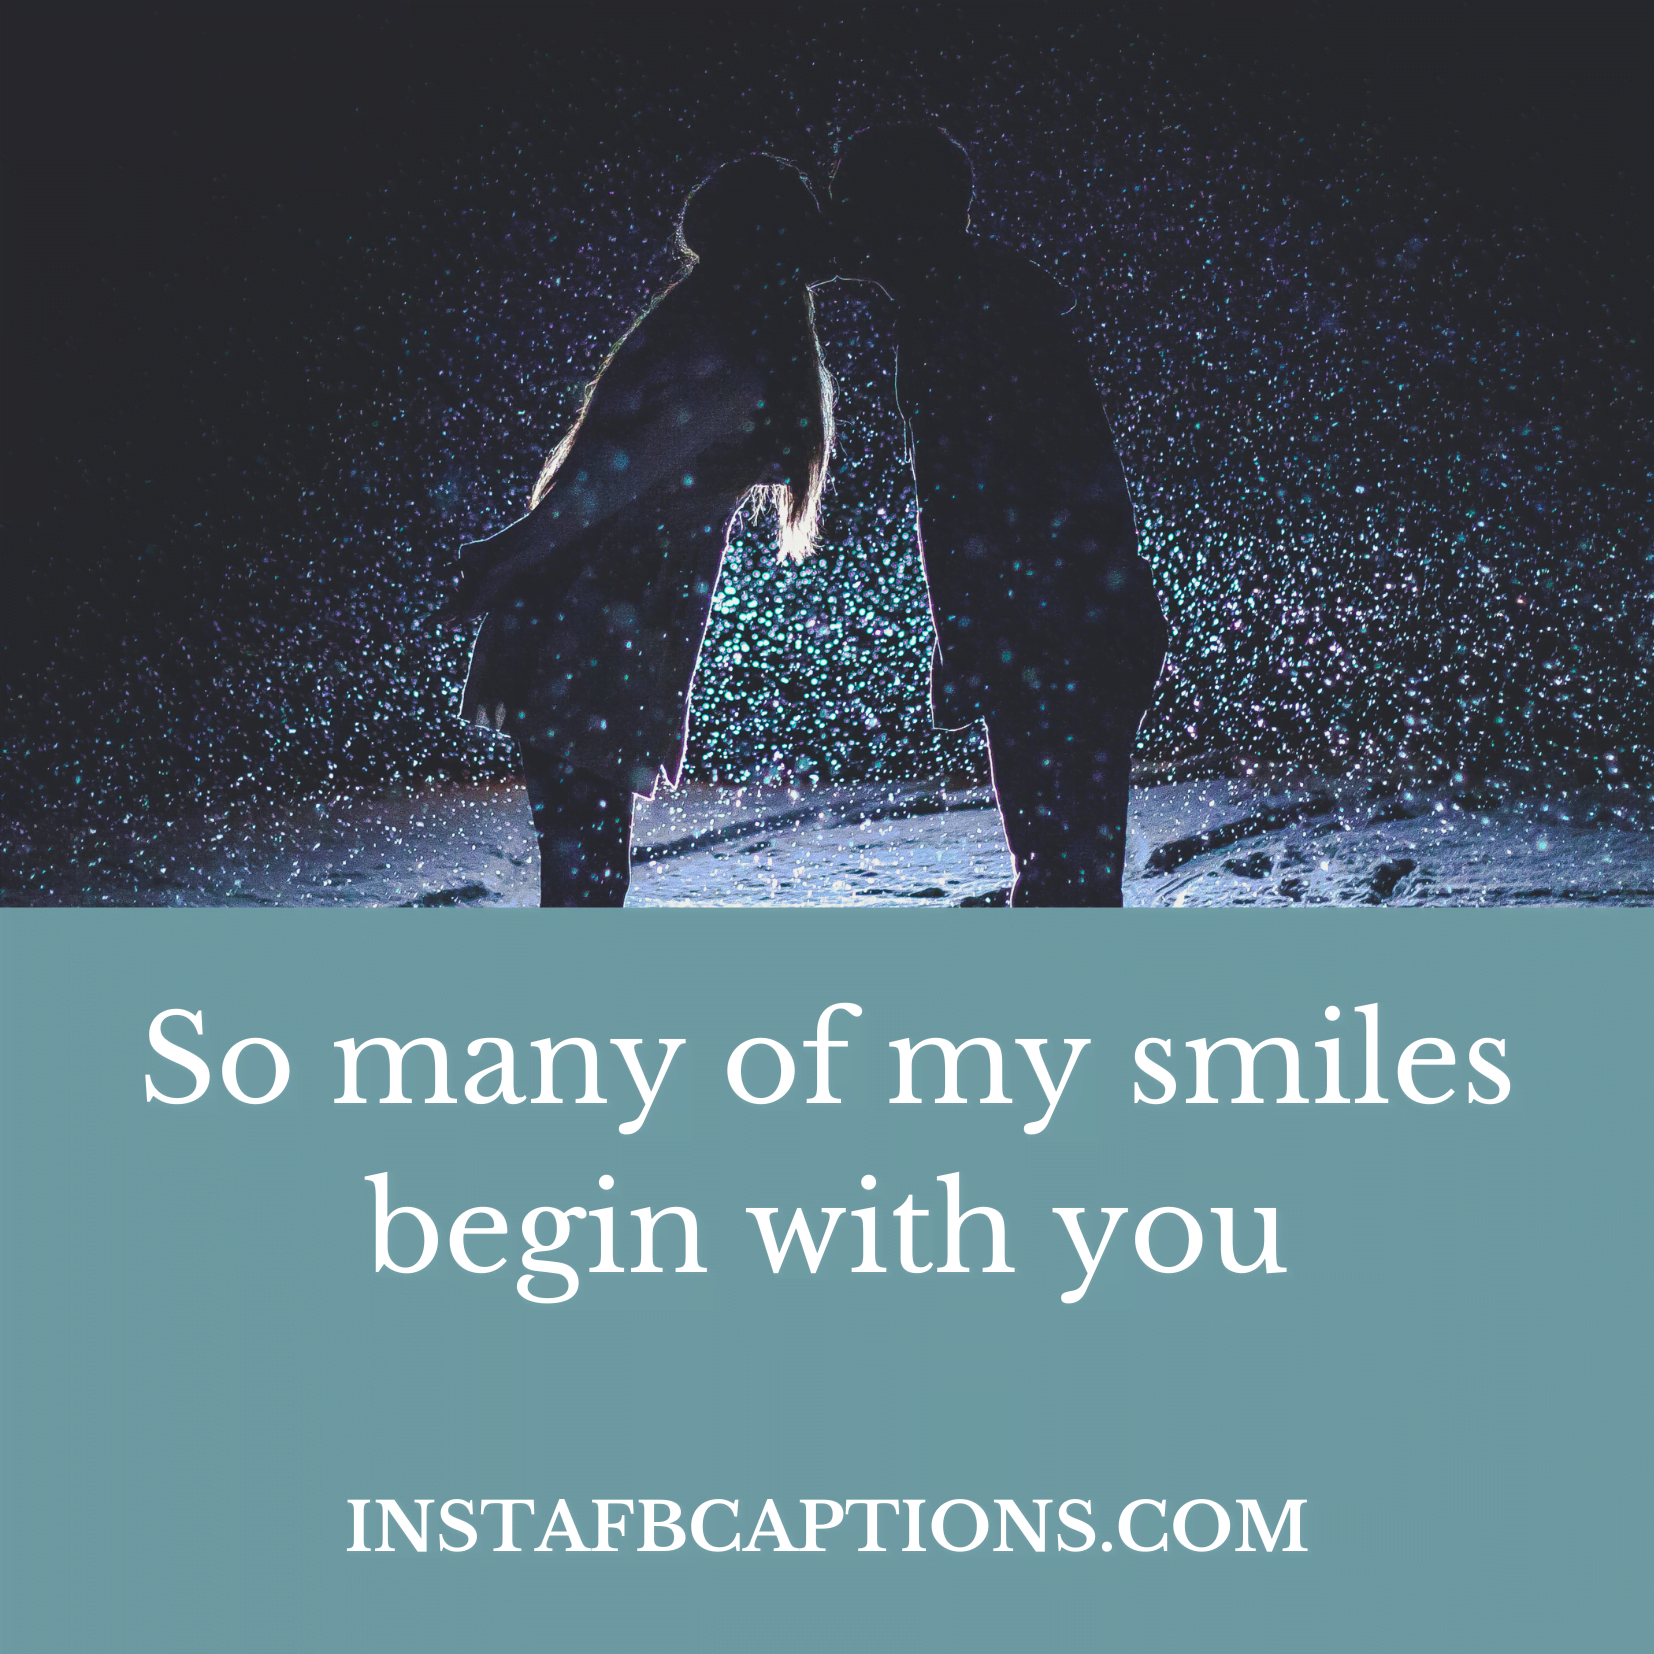 Funny Captions For Instagram Pictures  - Funny Captions for Instagram Pictures - Instagram Captions for Couple Pictures &#038; Photos in 2023